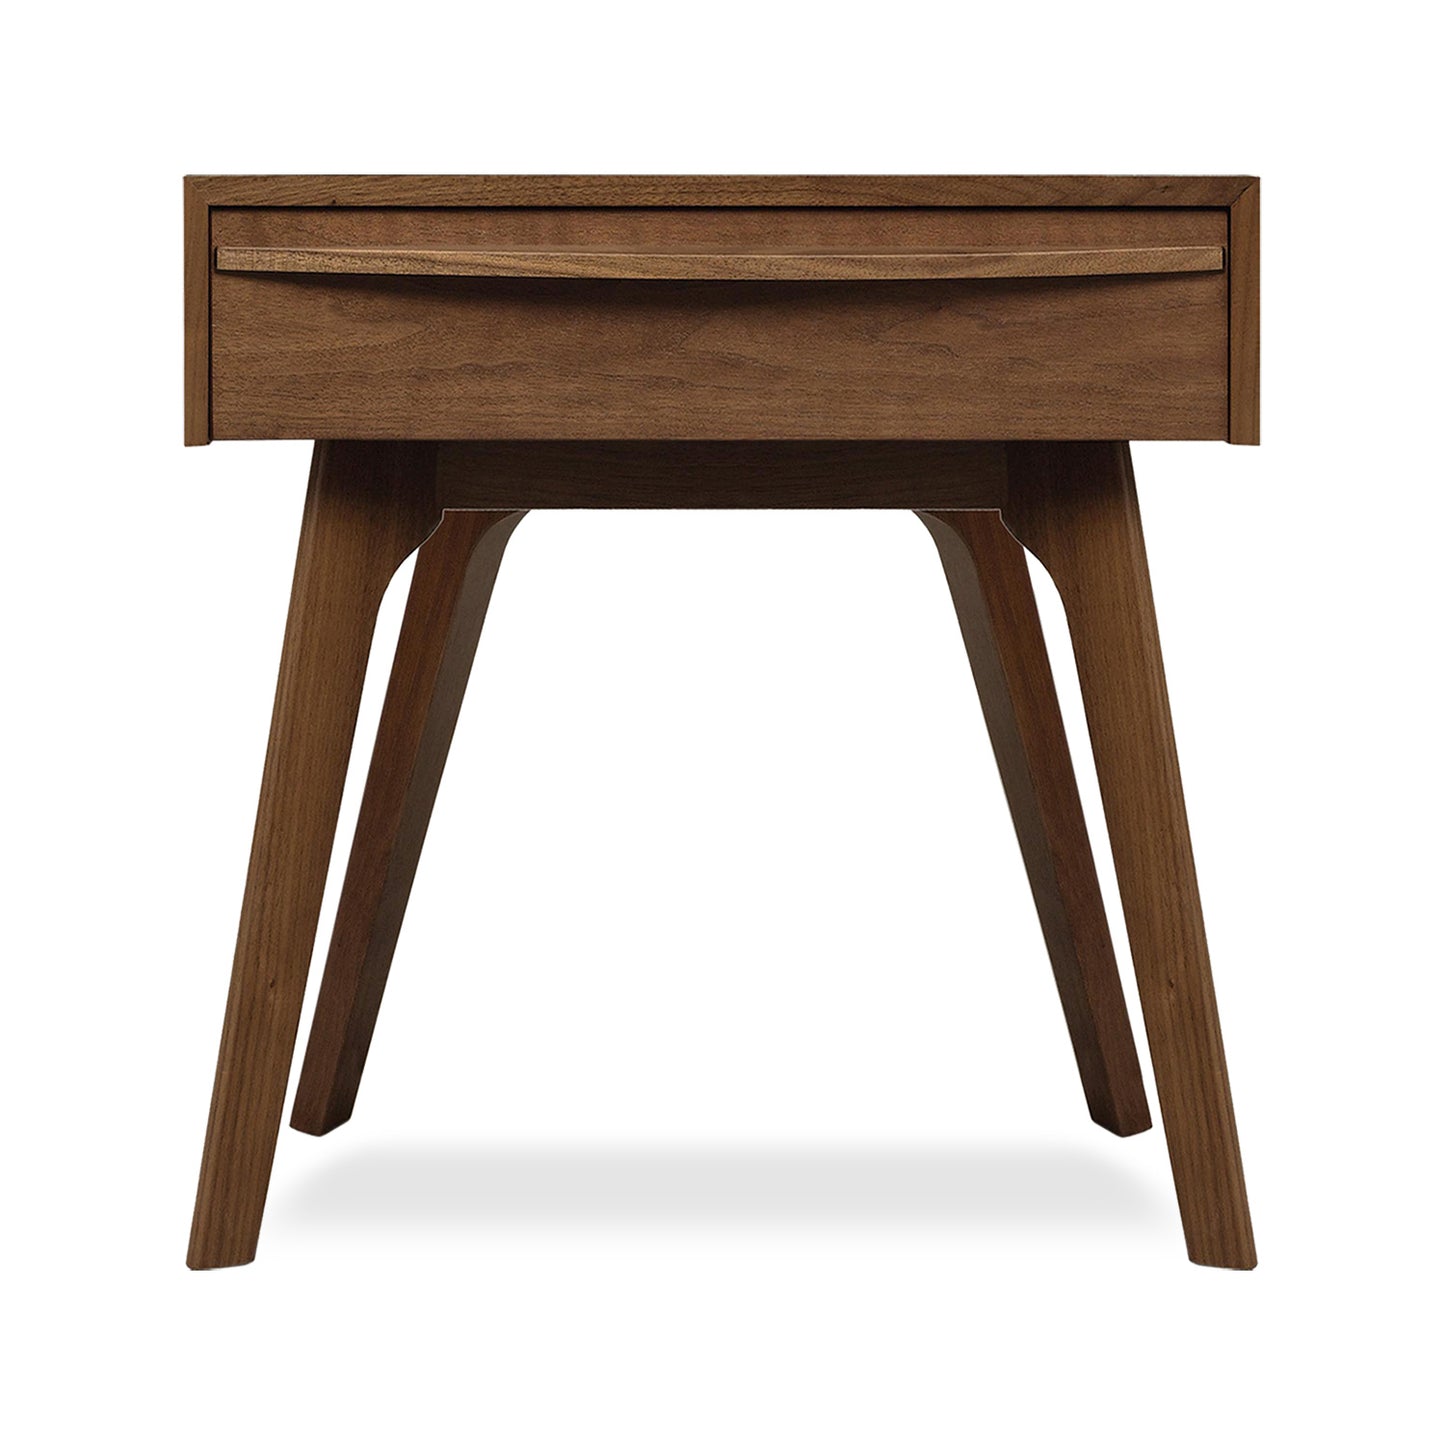 40% Off Clearance Sale: Catalina Walnut 20"H Nightstand (Store Display Model)